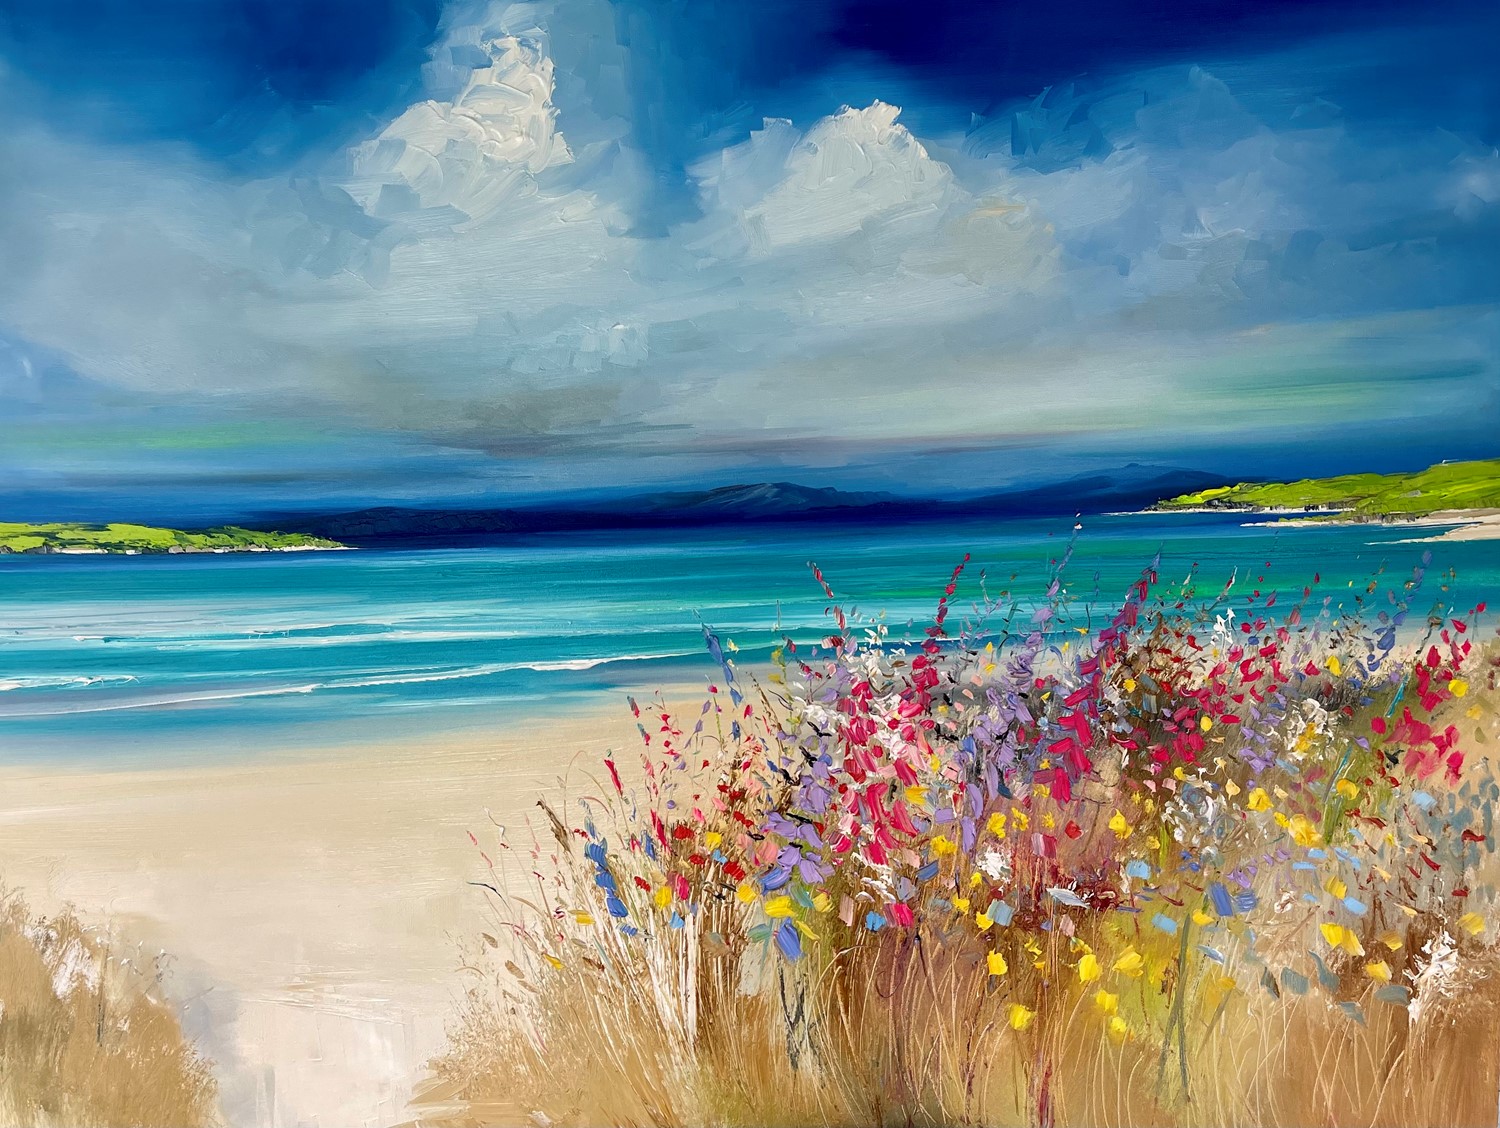 'A cacophony of Island Wildflowers ' by artist Rosanne Barr